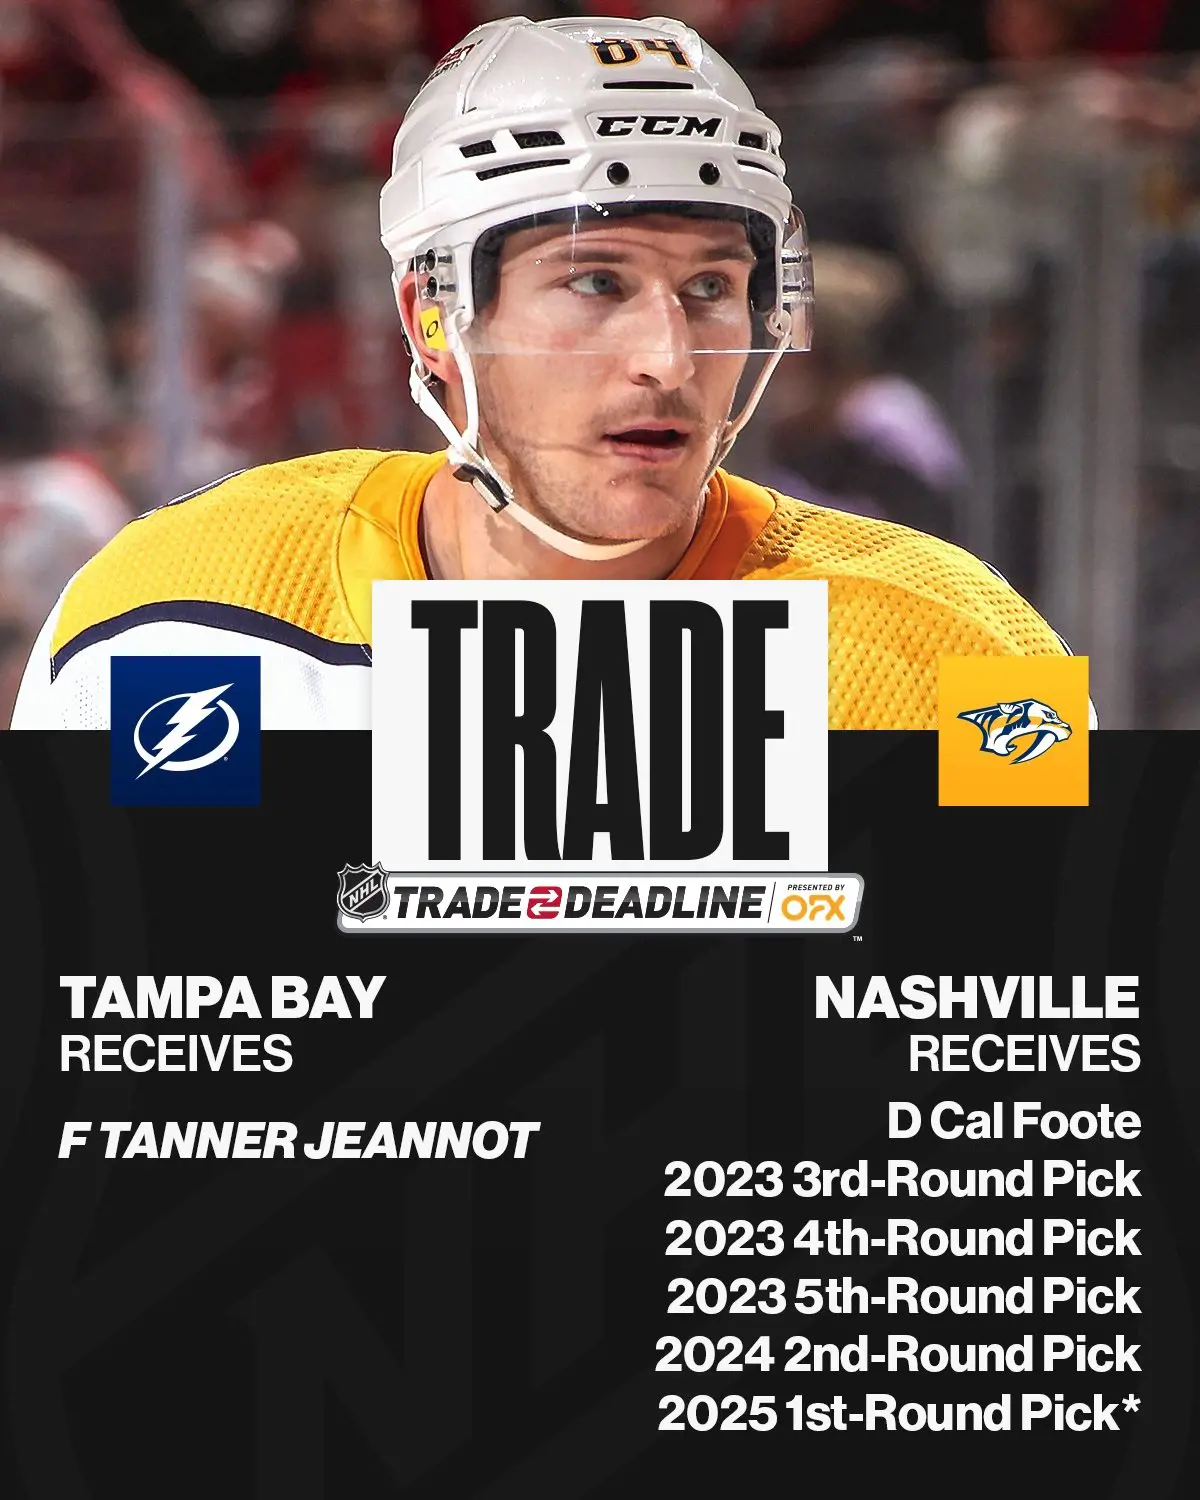 The Lightning acquired Jeannot for defensma Foote and a lot of draft picks including three picks in 2023 and first-round pick in 2025